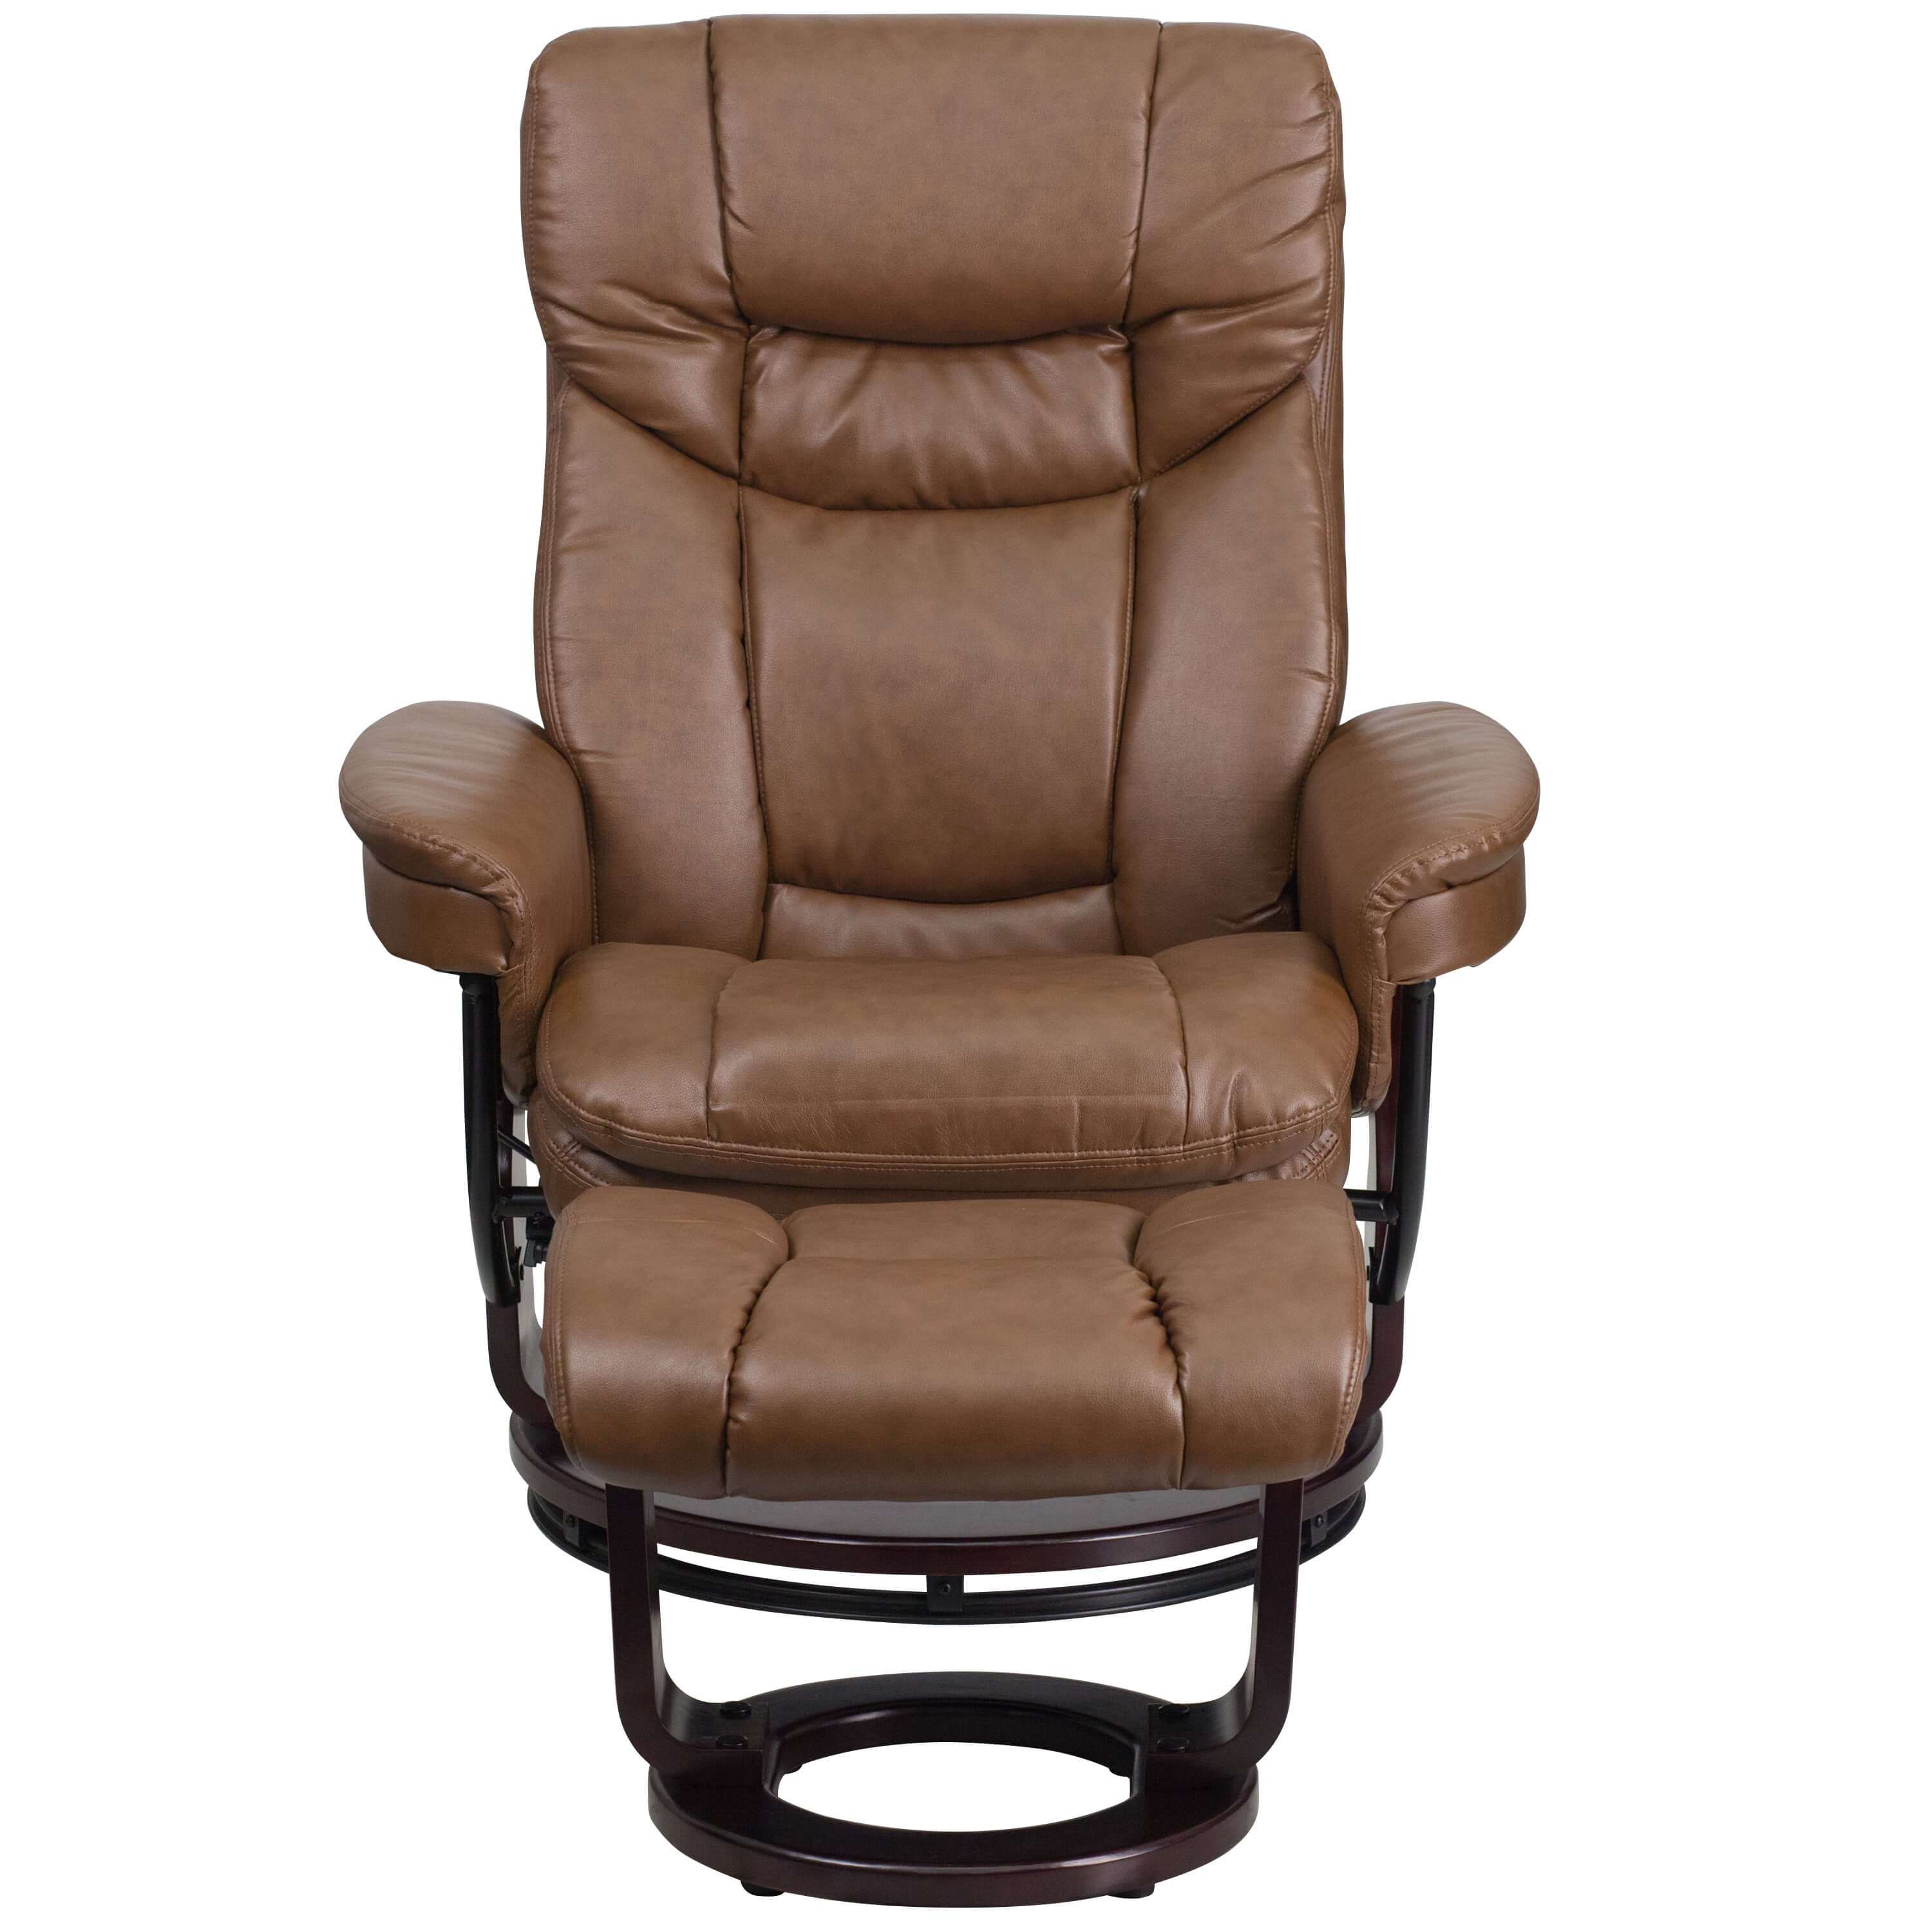 Reclining armchair front view